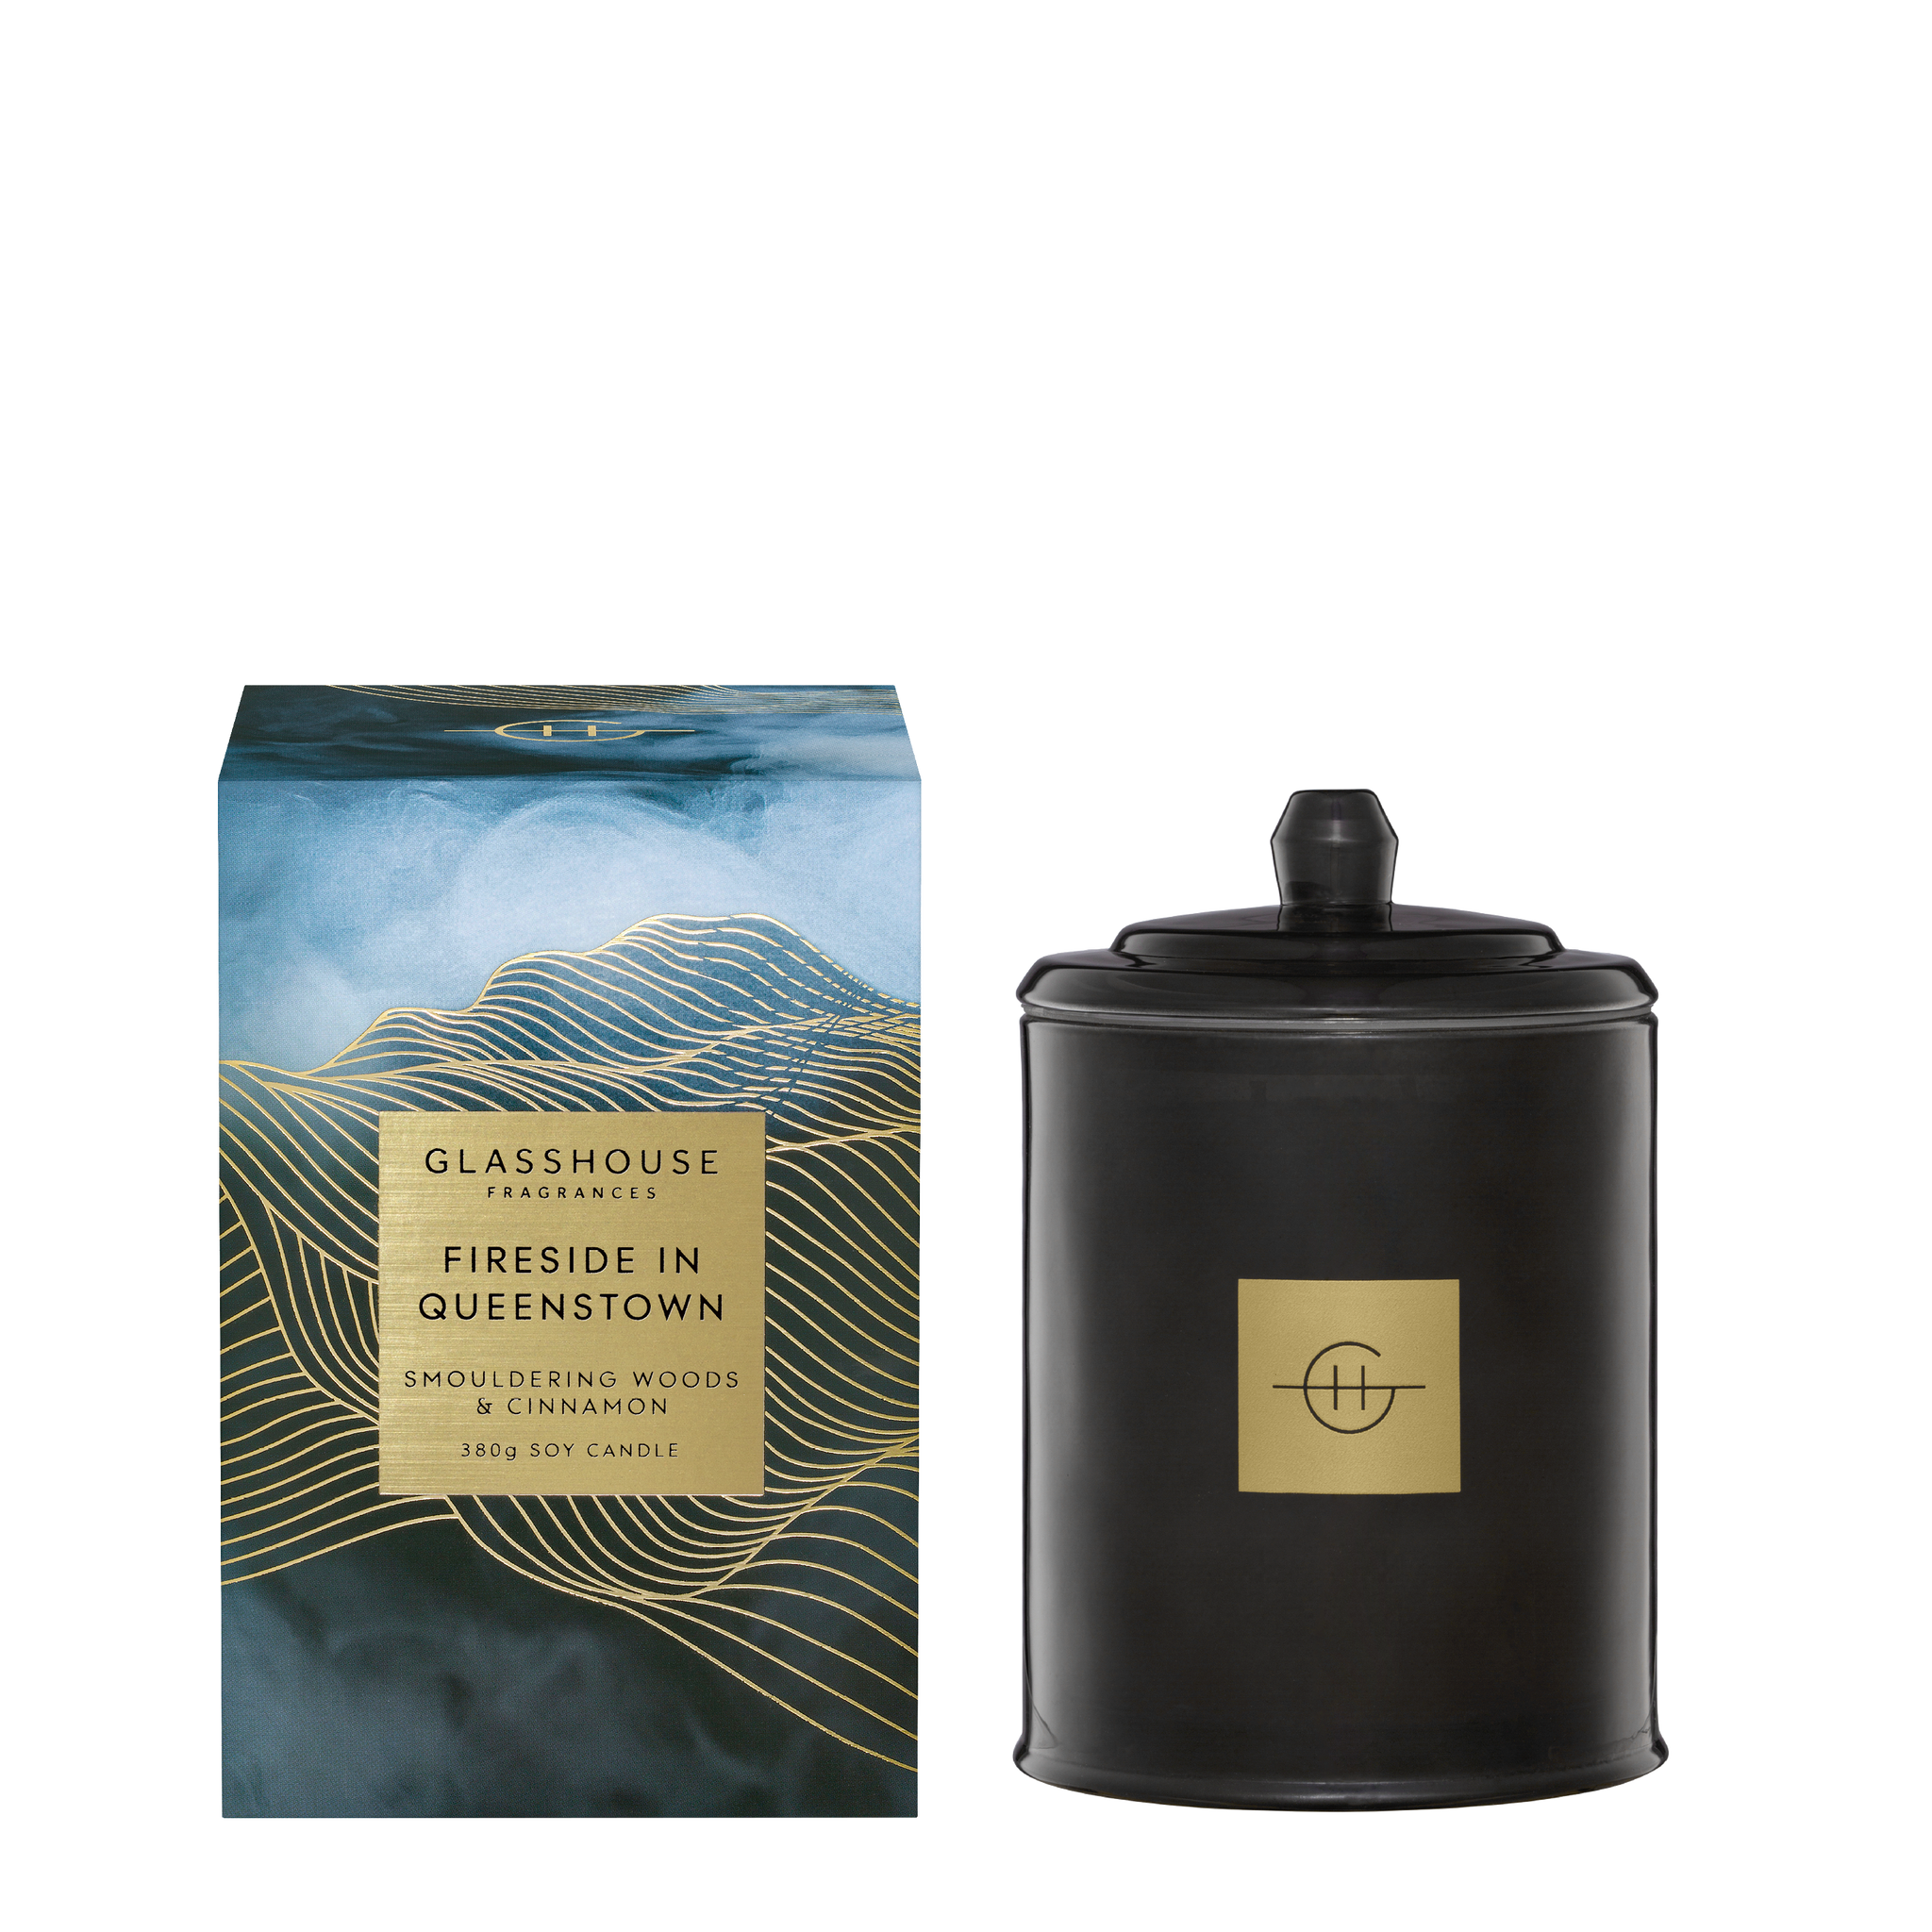 Glasshouse Fragrances Fireside In Queenstown 380g Triple Soy Candle